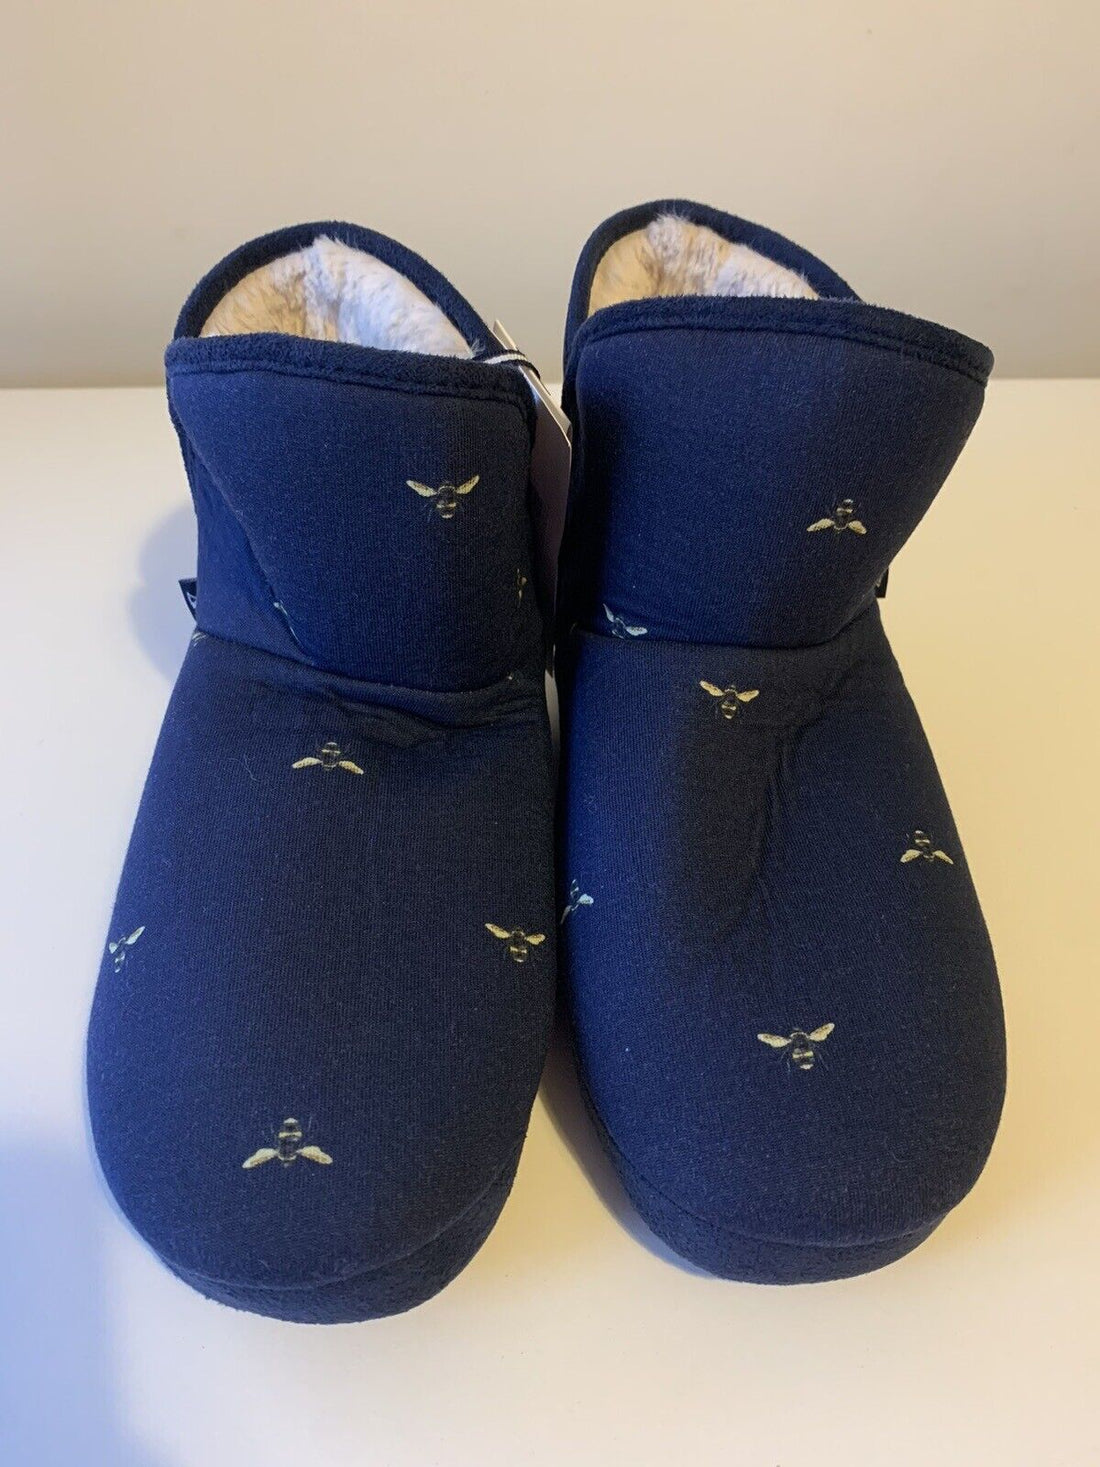 Joules Cabin Faux Fur Lined Slippers Navy Bees Sizes S, M, L RRP £39.95